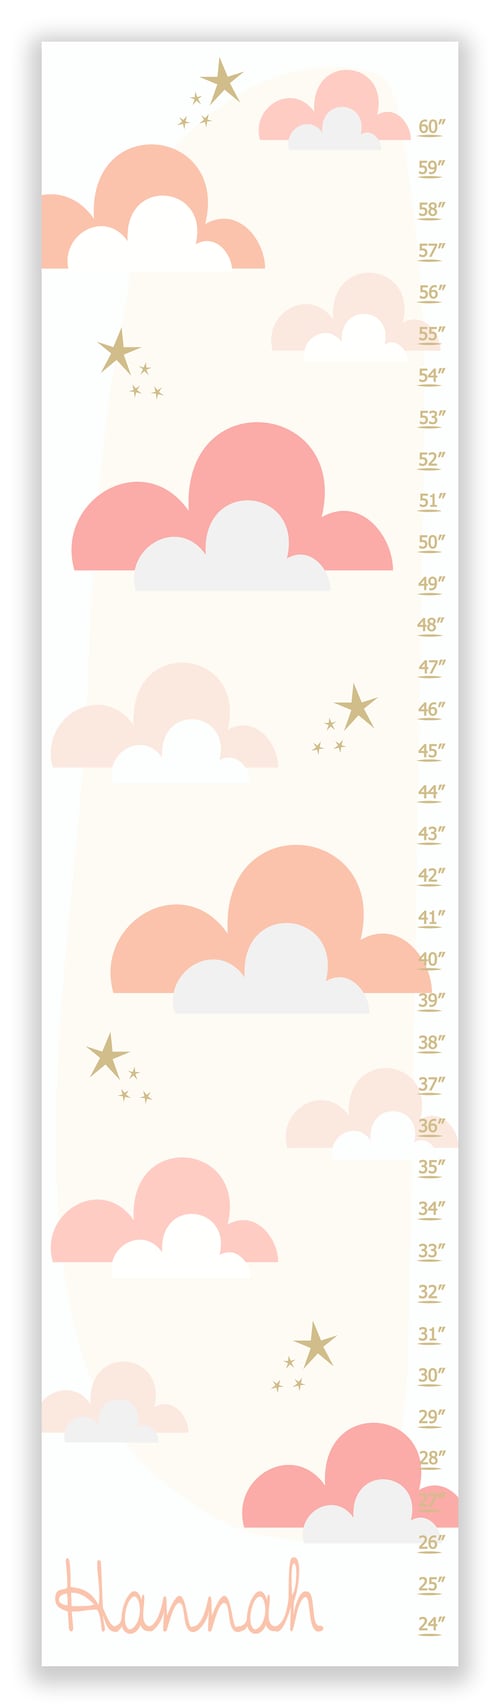 Image of Blush Pink Candy Clouds - Personalized Canvas Growth Chart